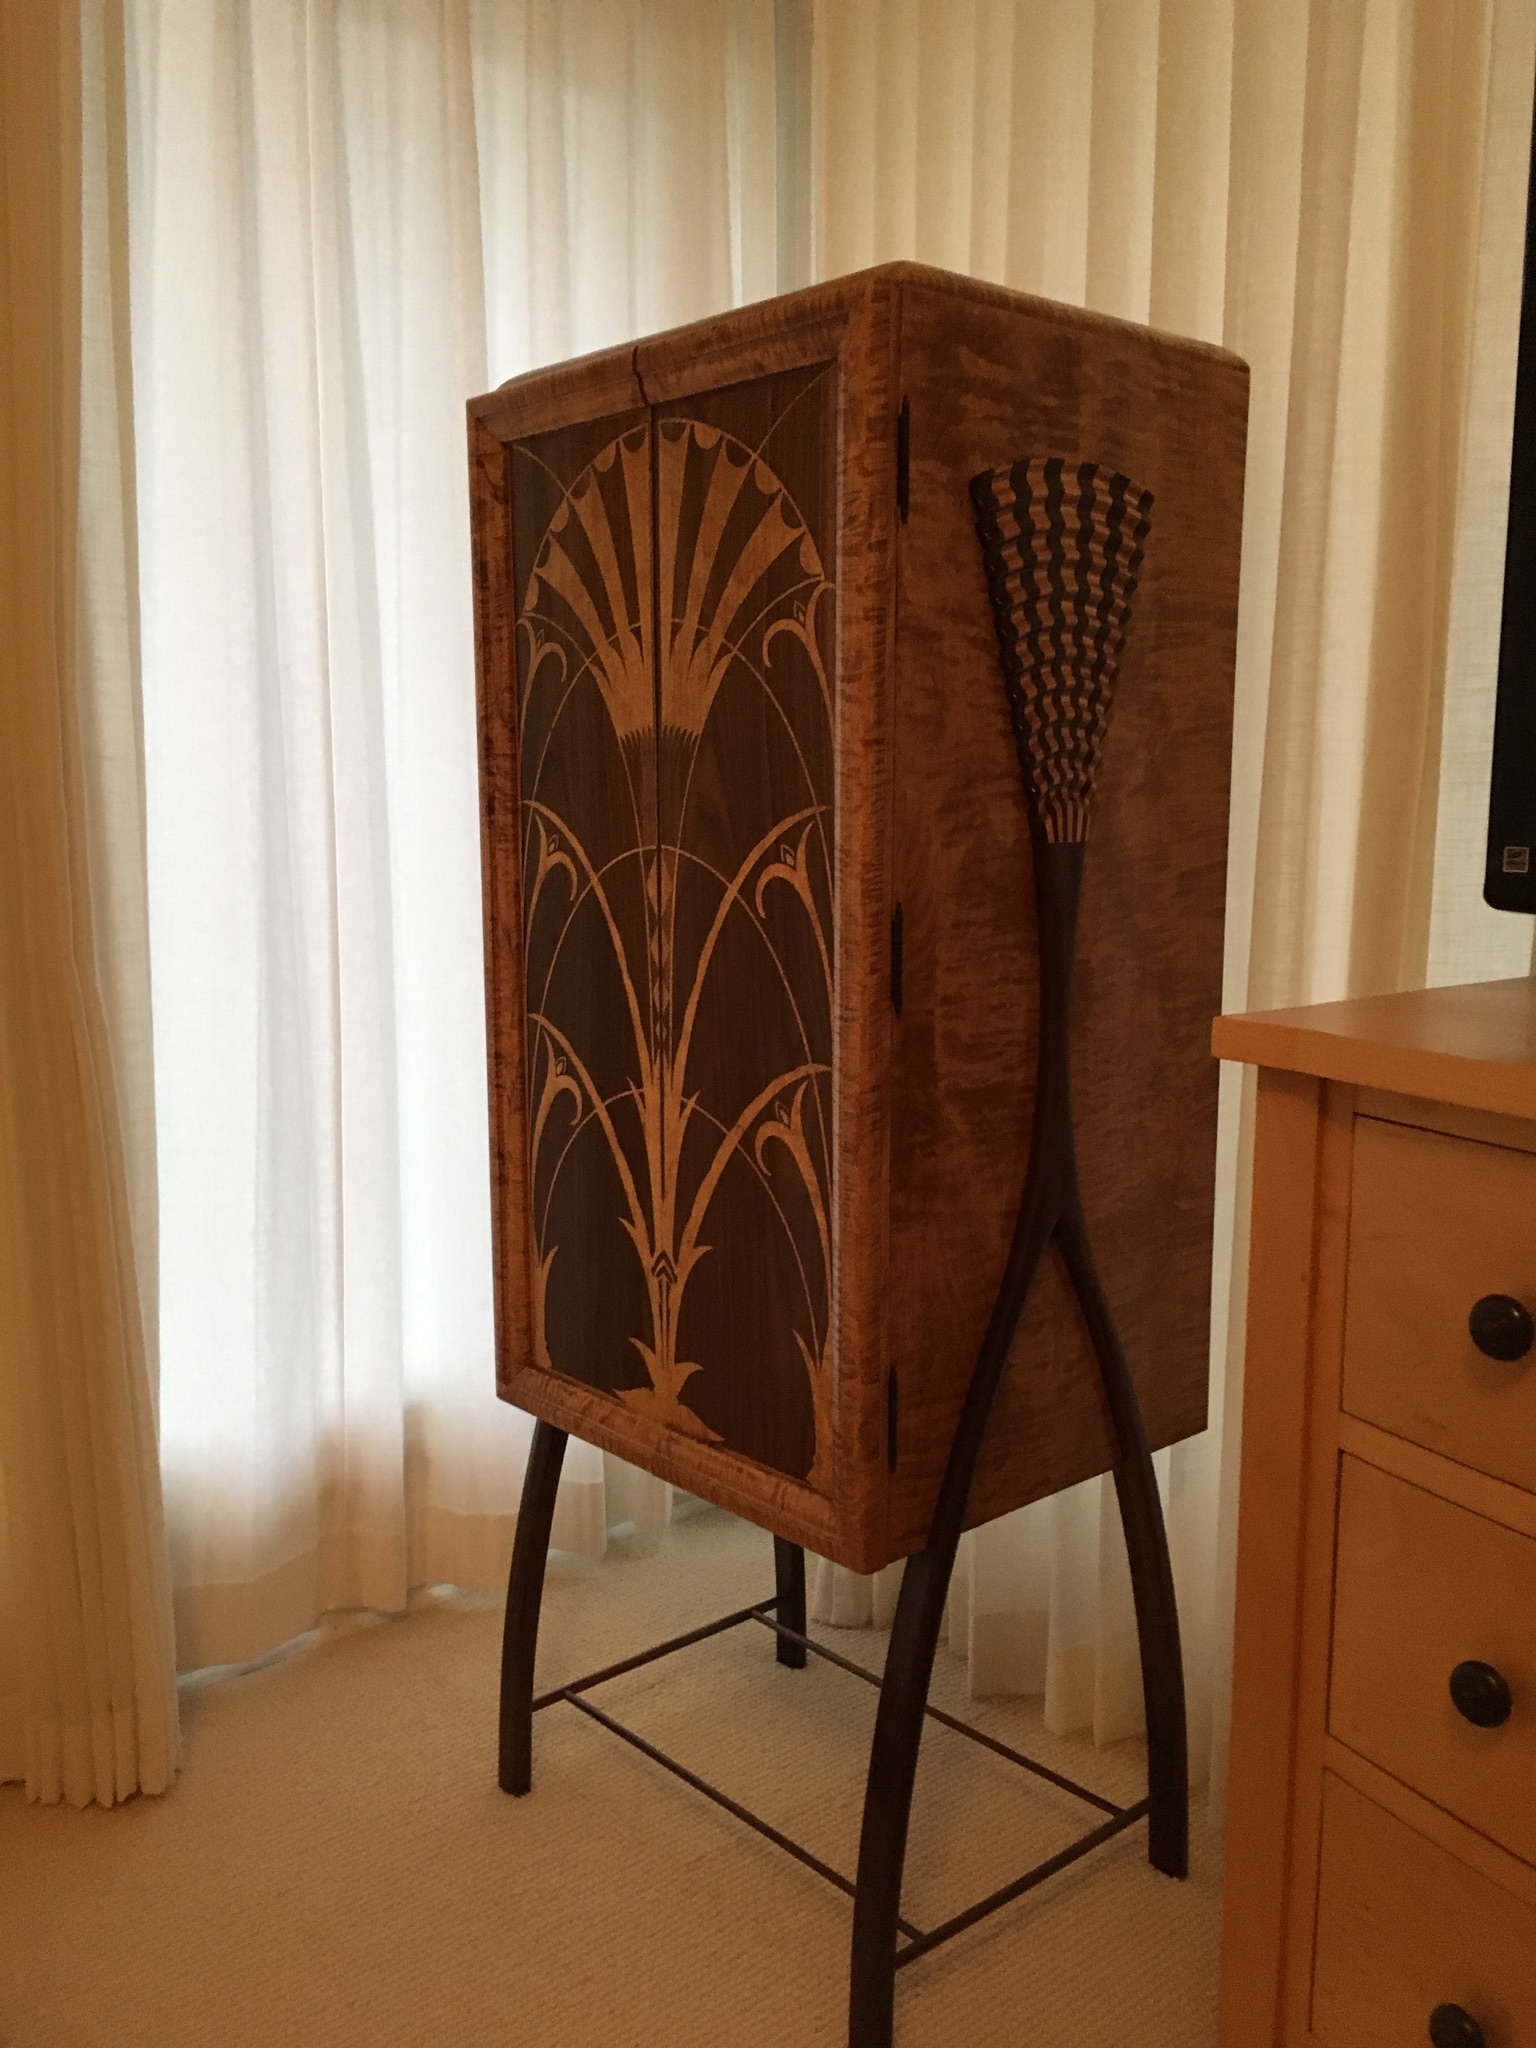 Cabinet inspired by the elevator doors in the Chrysler Building 